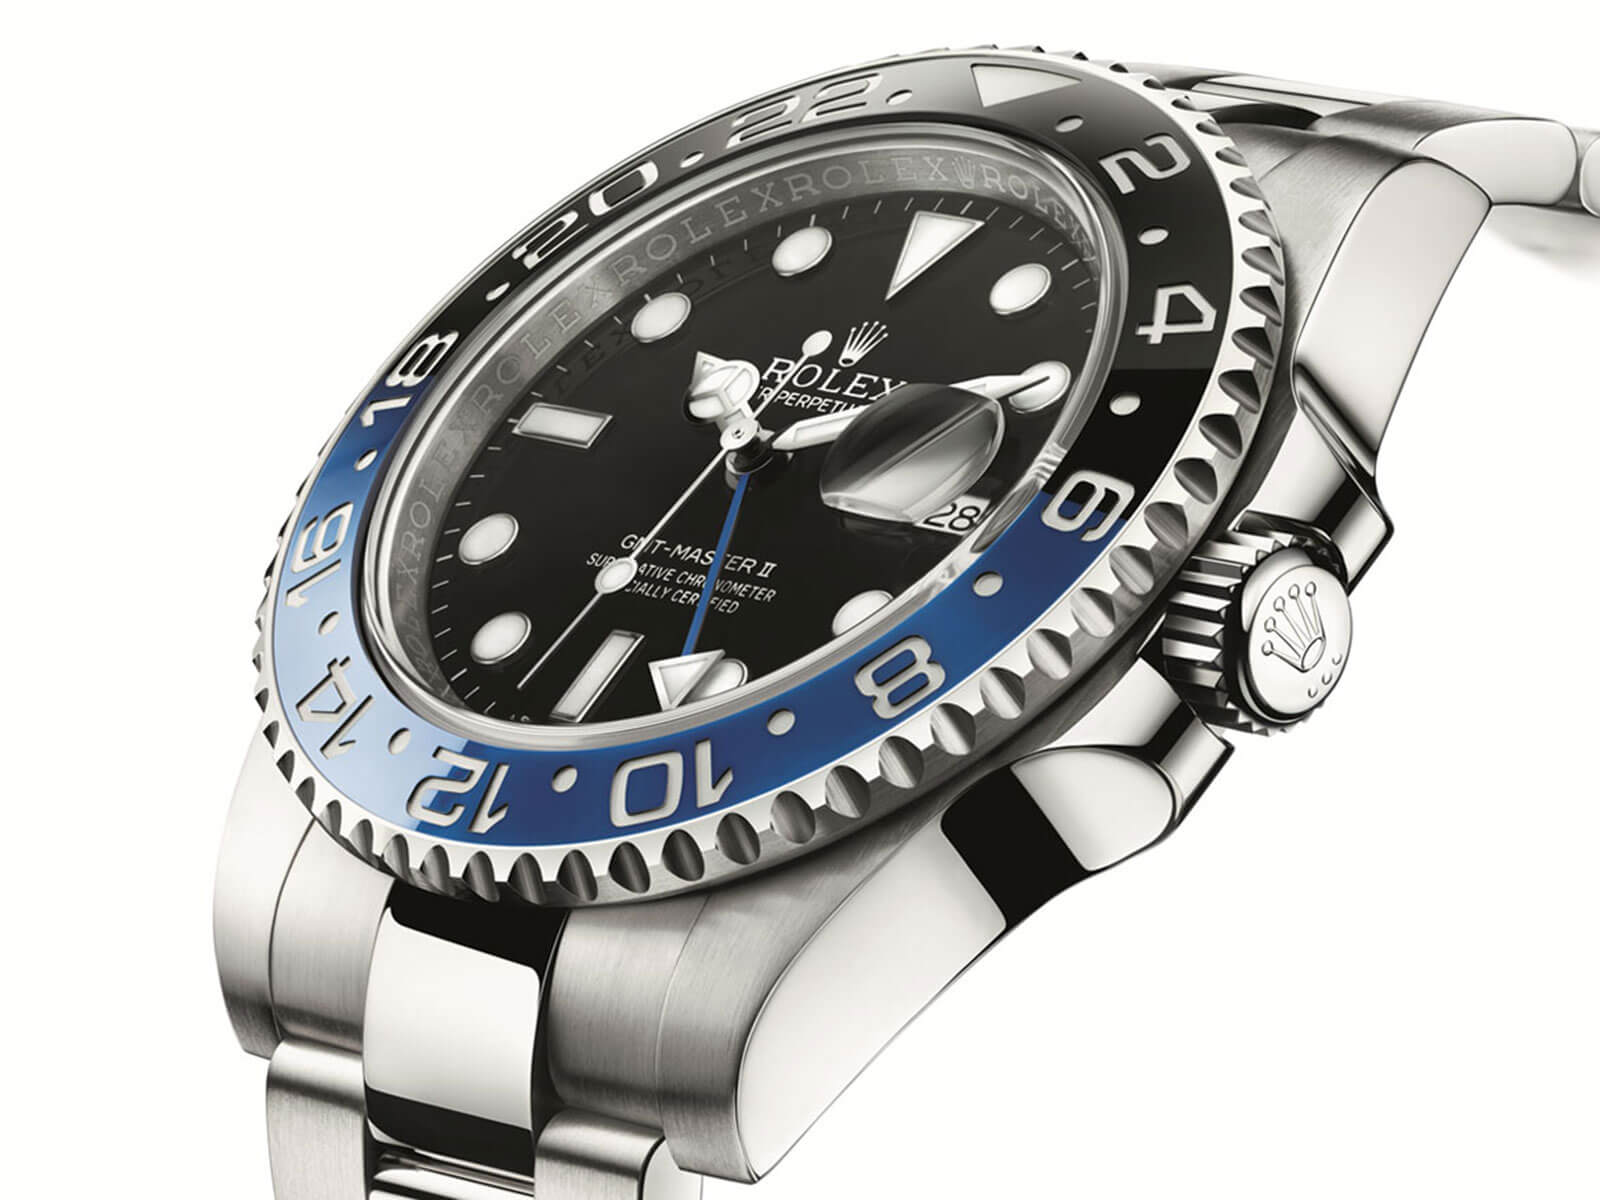 Rolex GMT-Master II 116710BLNR is the first Rolex model with the Blue-Black Cerachrom Bezel